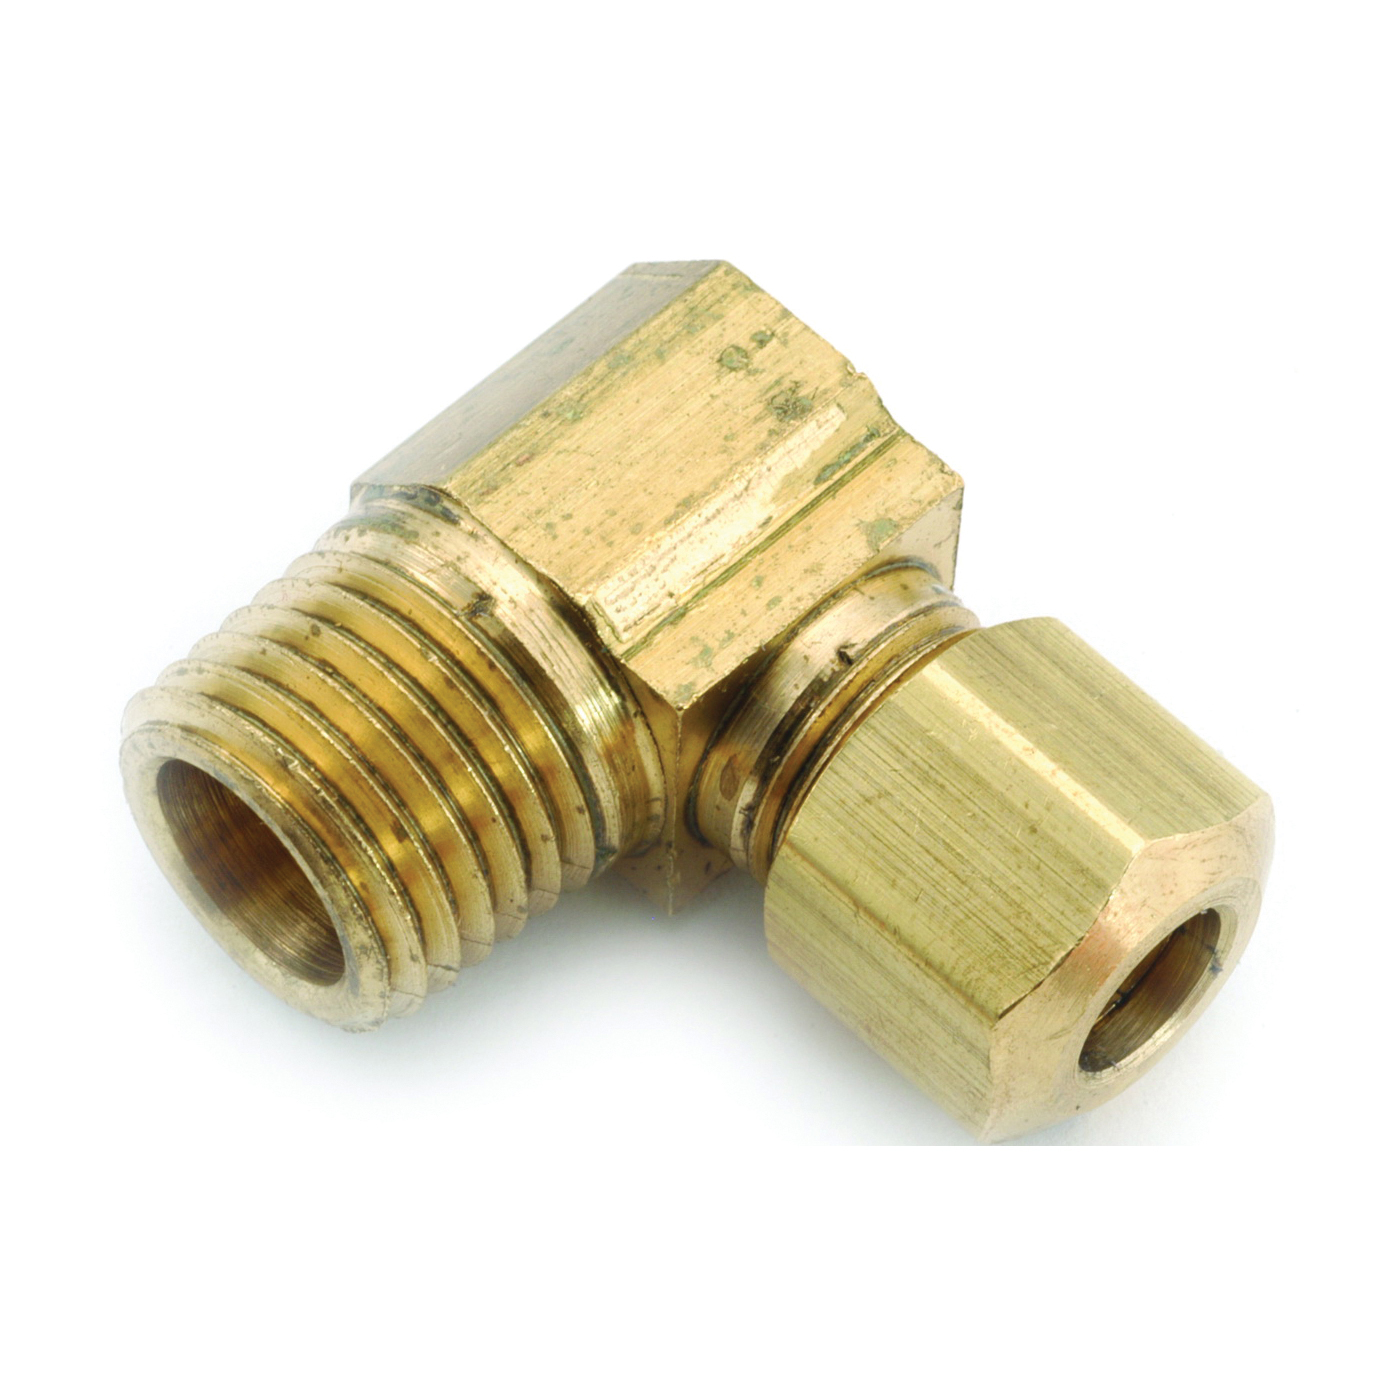 Anderson Metals 750069-0606 Tube Elbow, 3/8 in, 90 deg Angle, Brass, 200 psi Pressure - 1